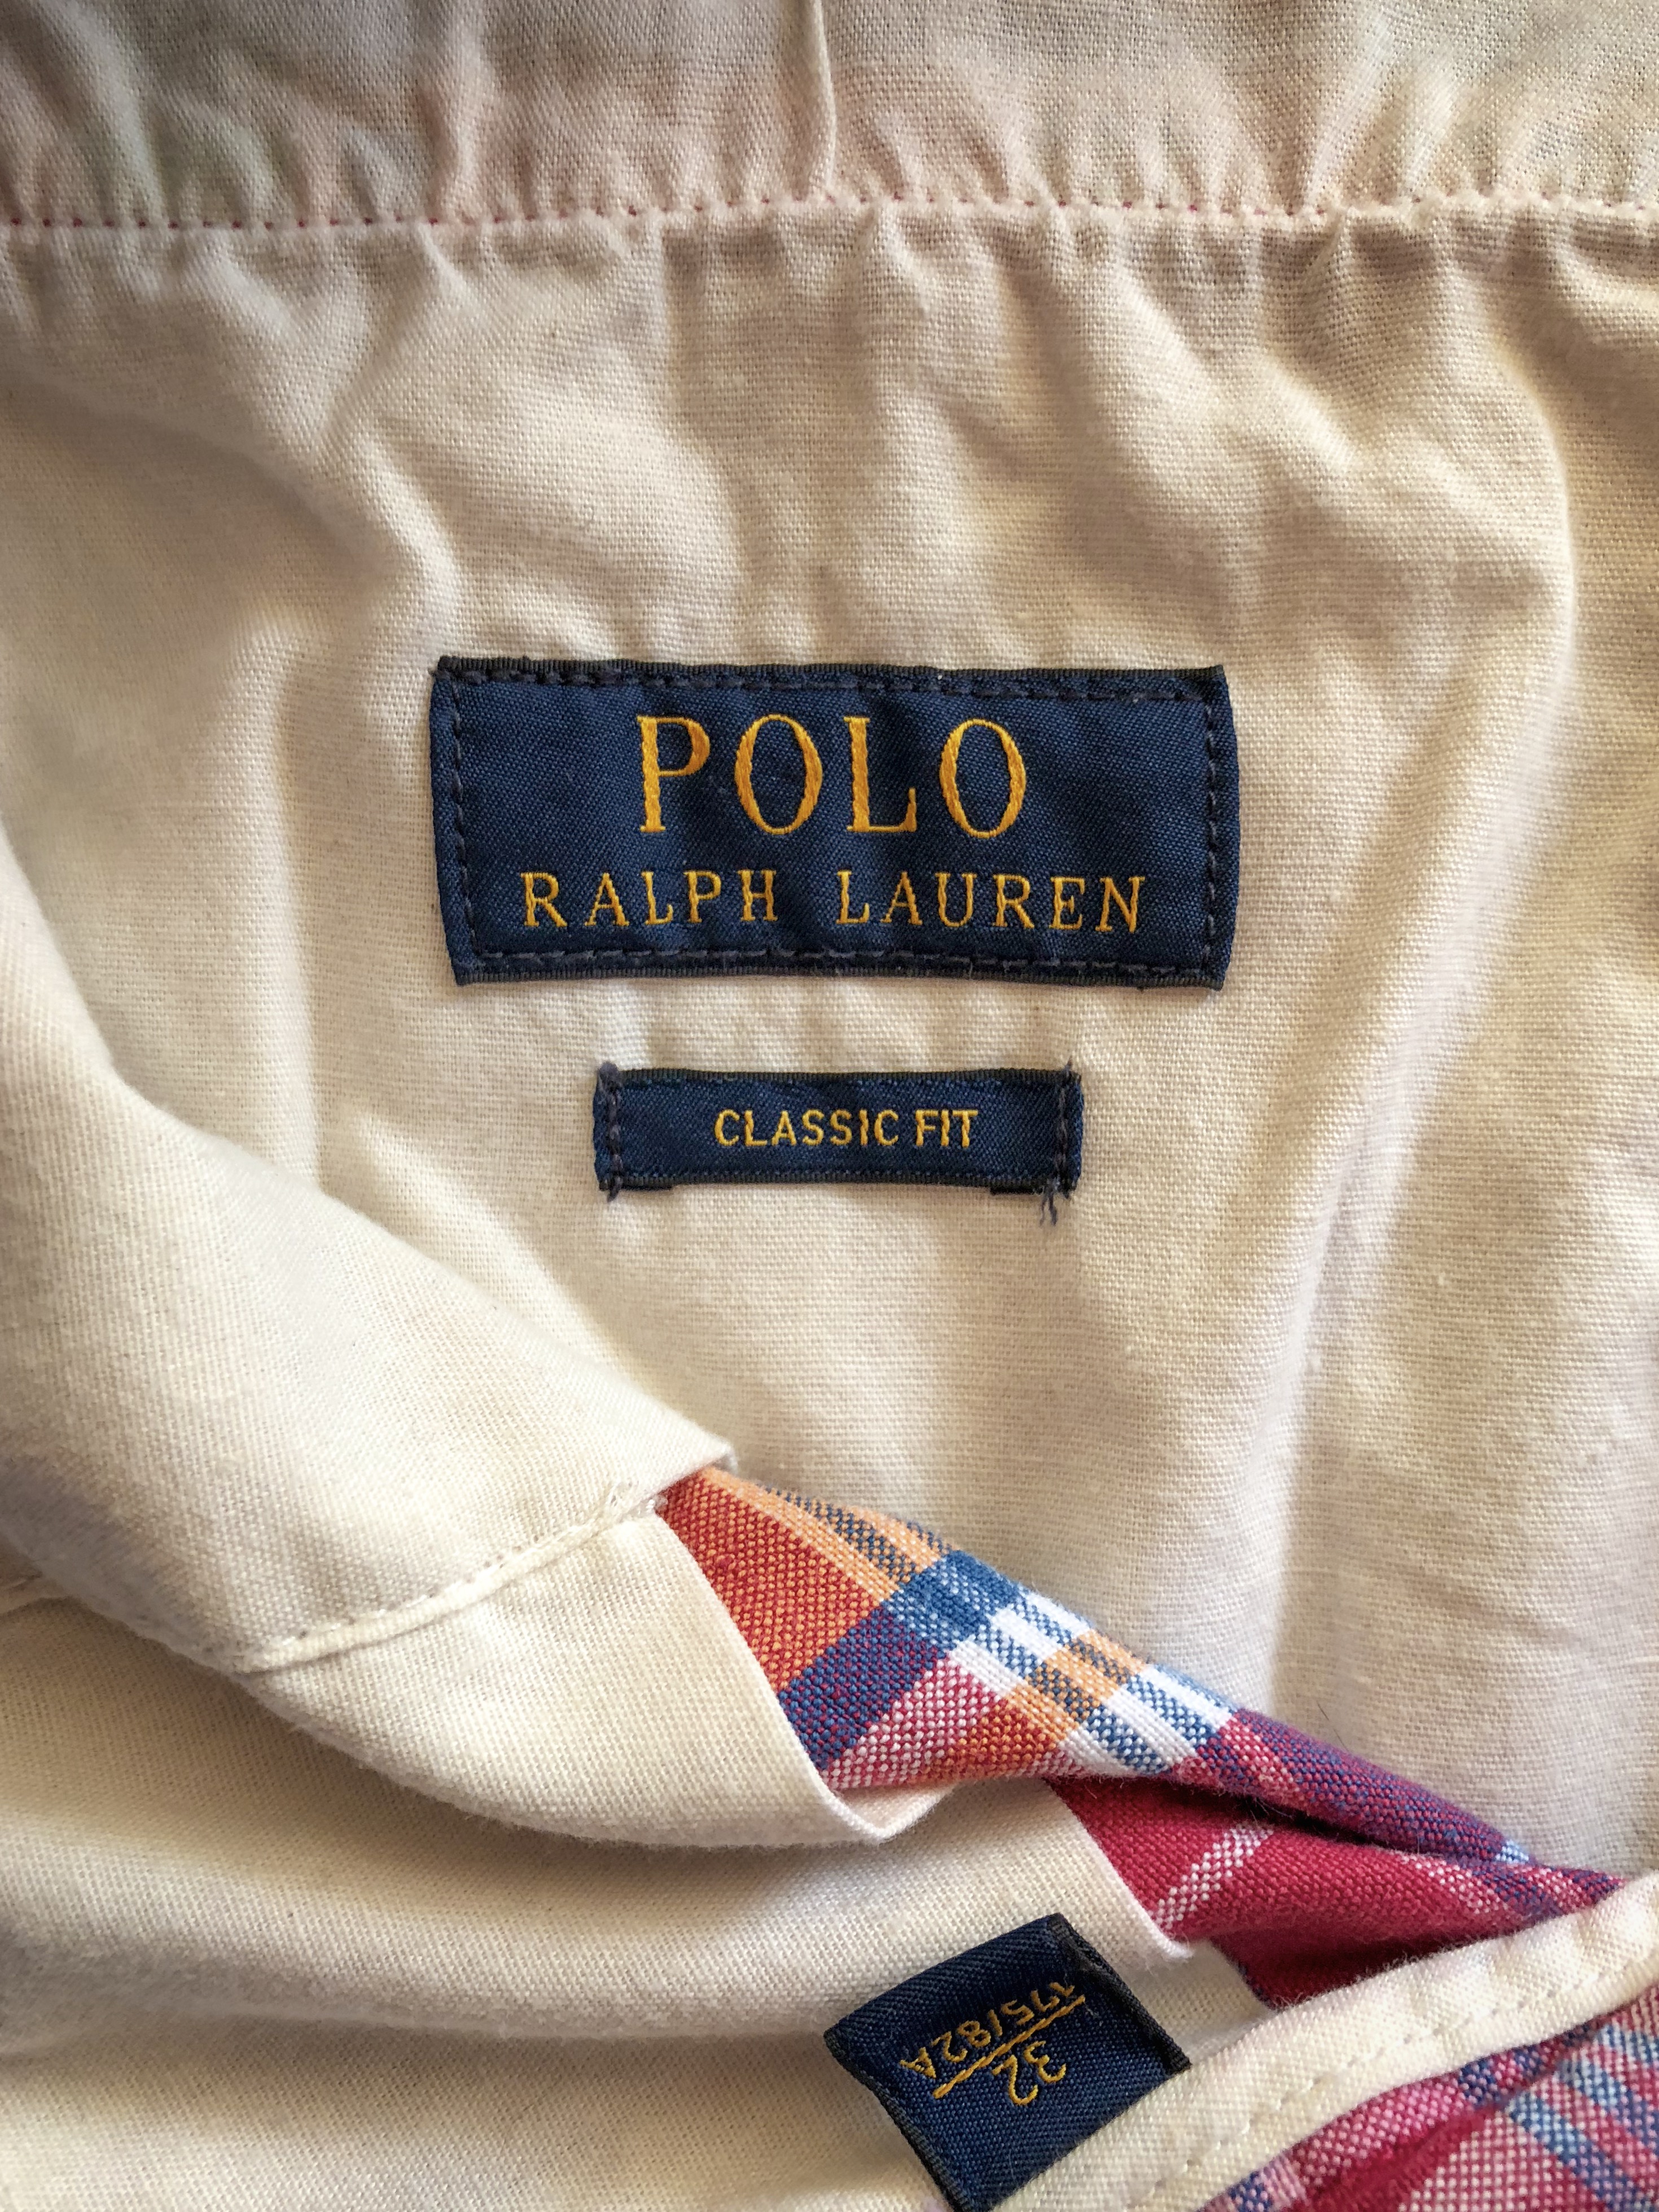 How to authenticate Polo Ralph Lauren 